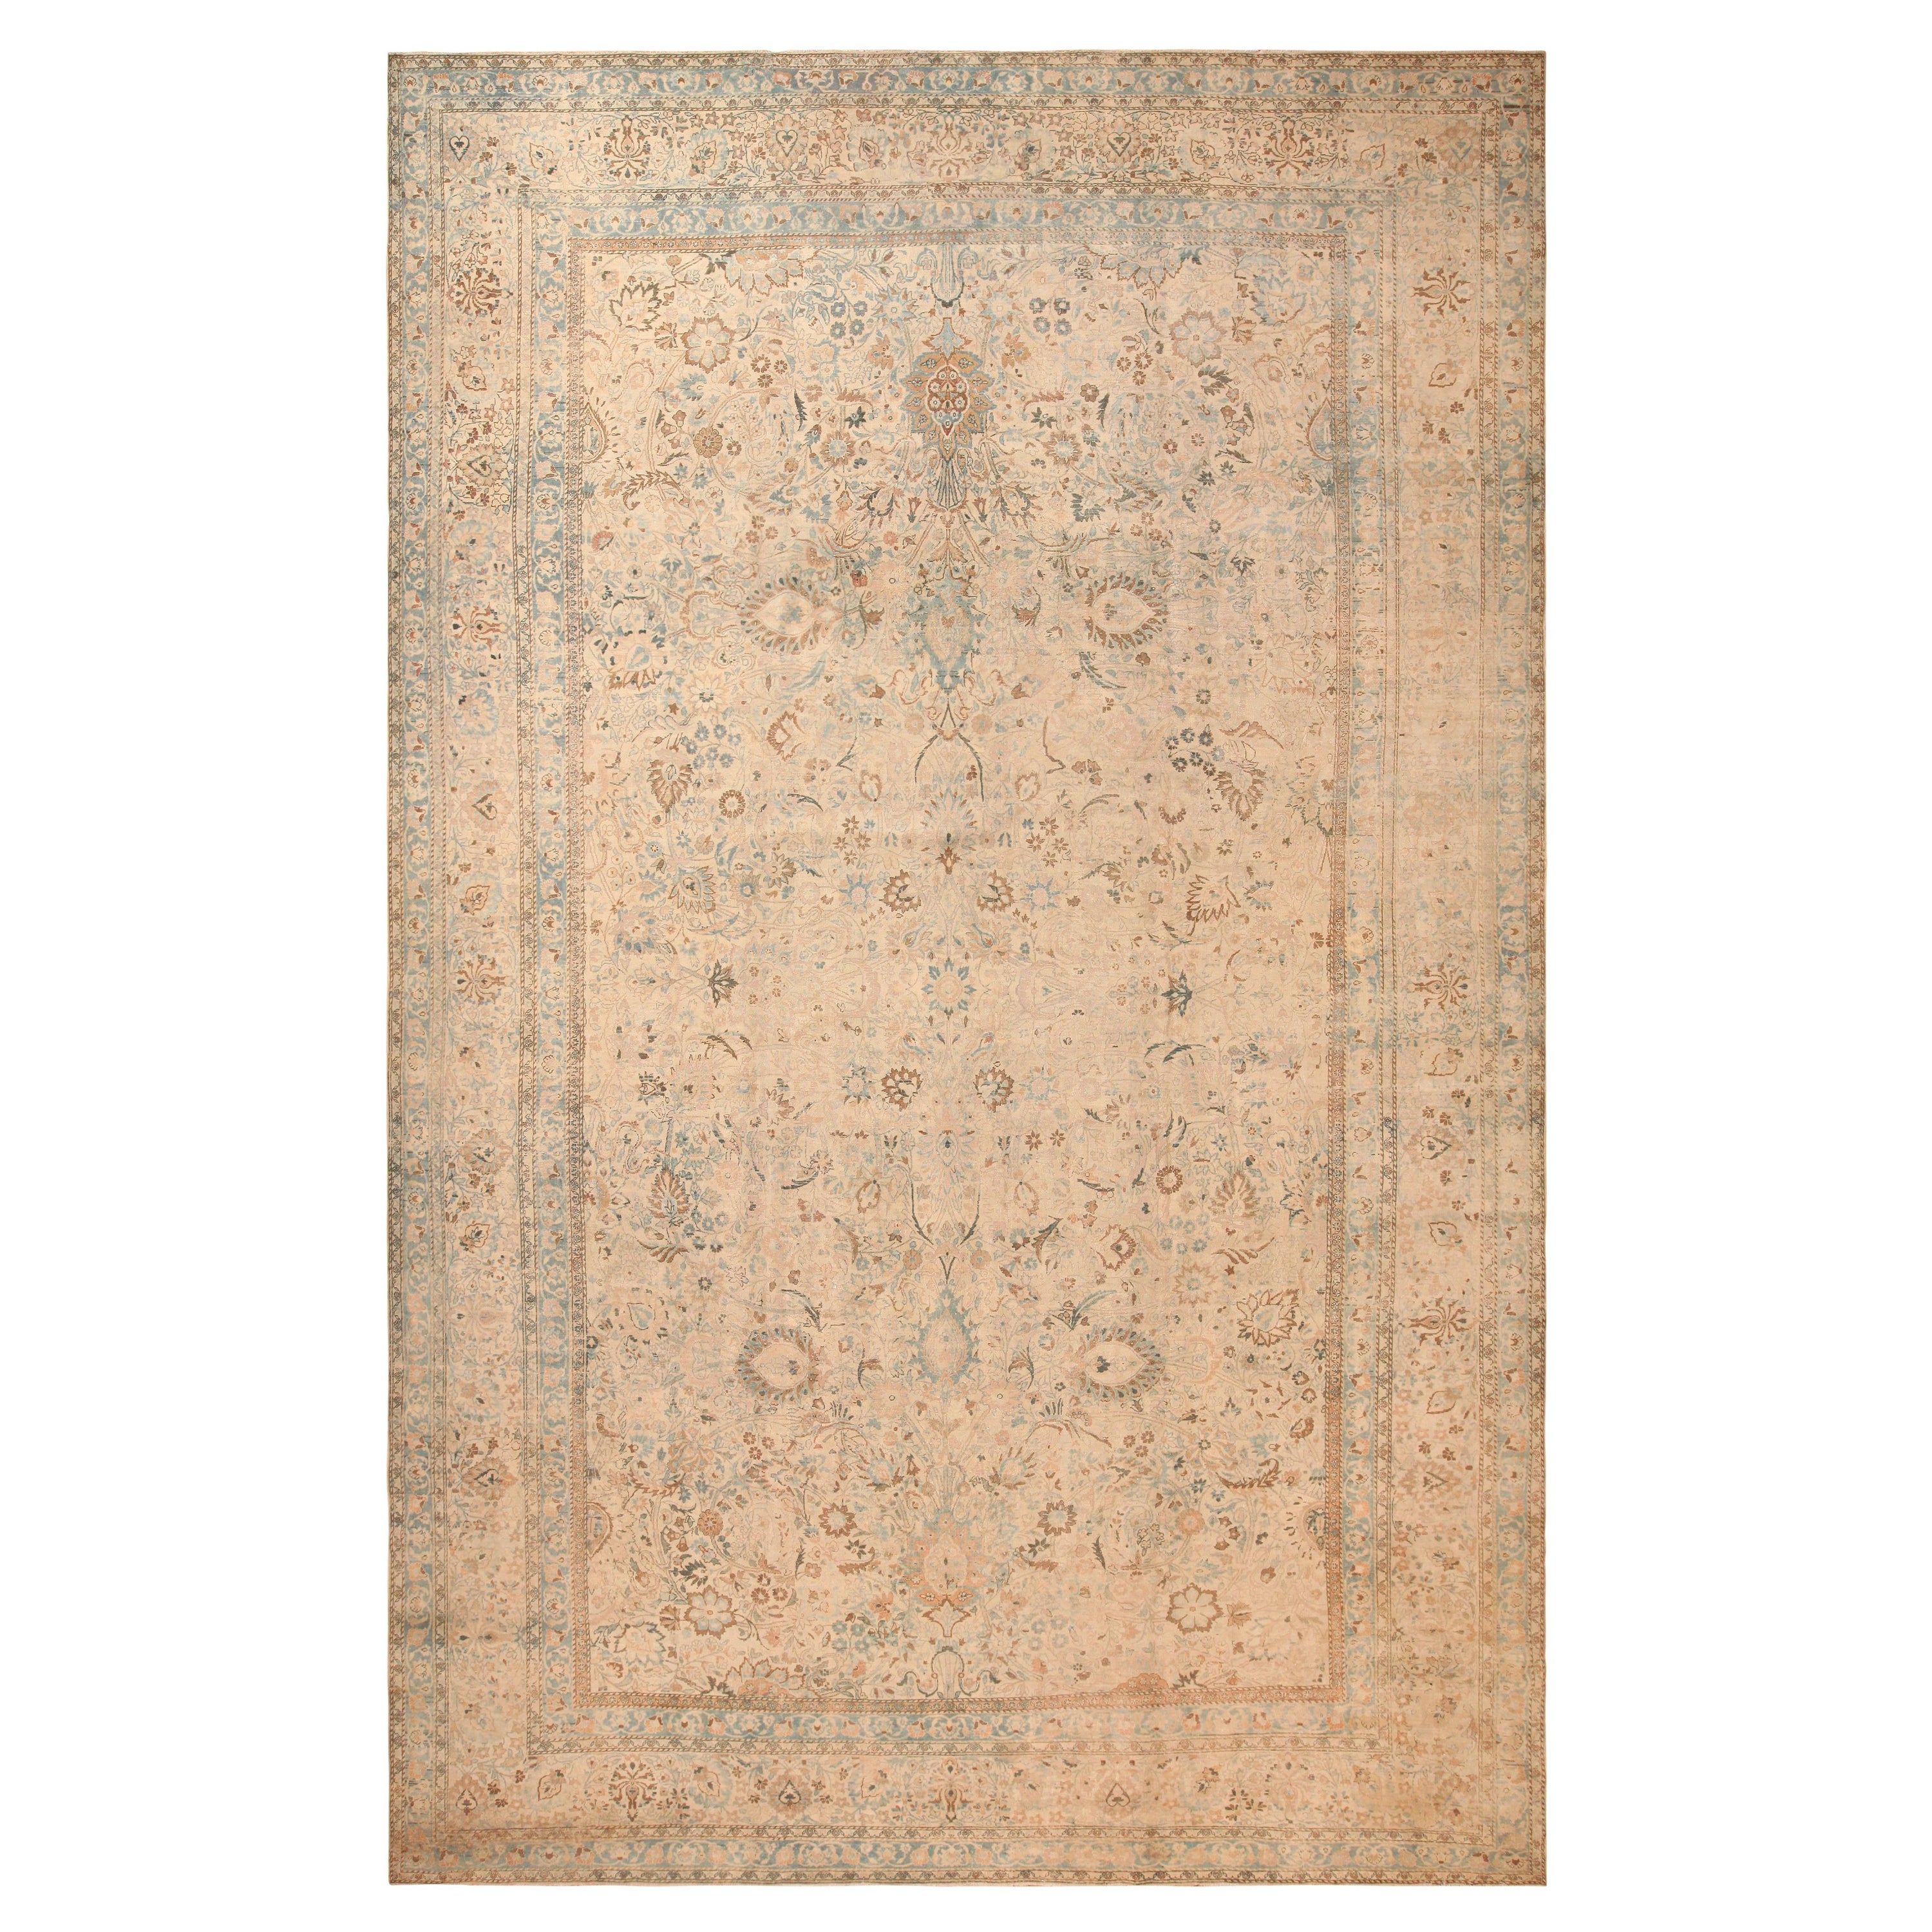 Nazmiyal Collection Antique Persian Khorassan Rug. Size: 13 ft x 21 ft